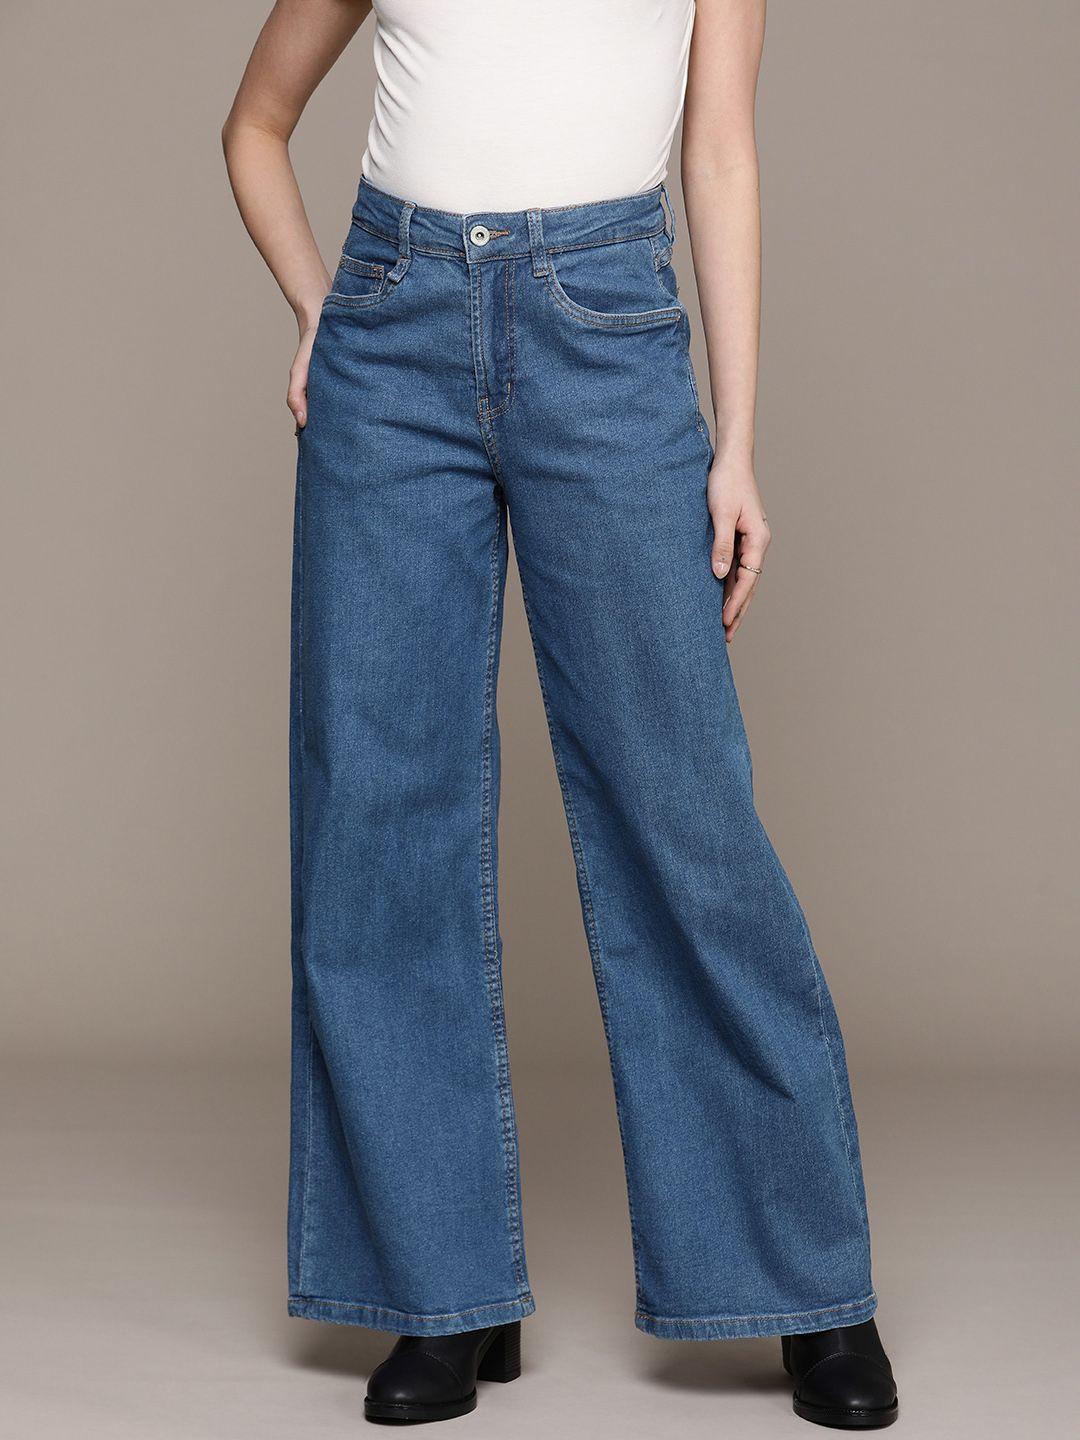 the roadster life co. women wide leg stretchable jeans